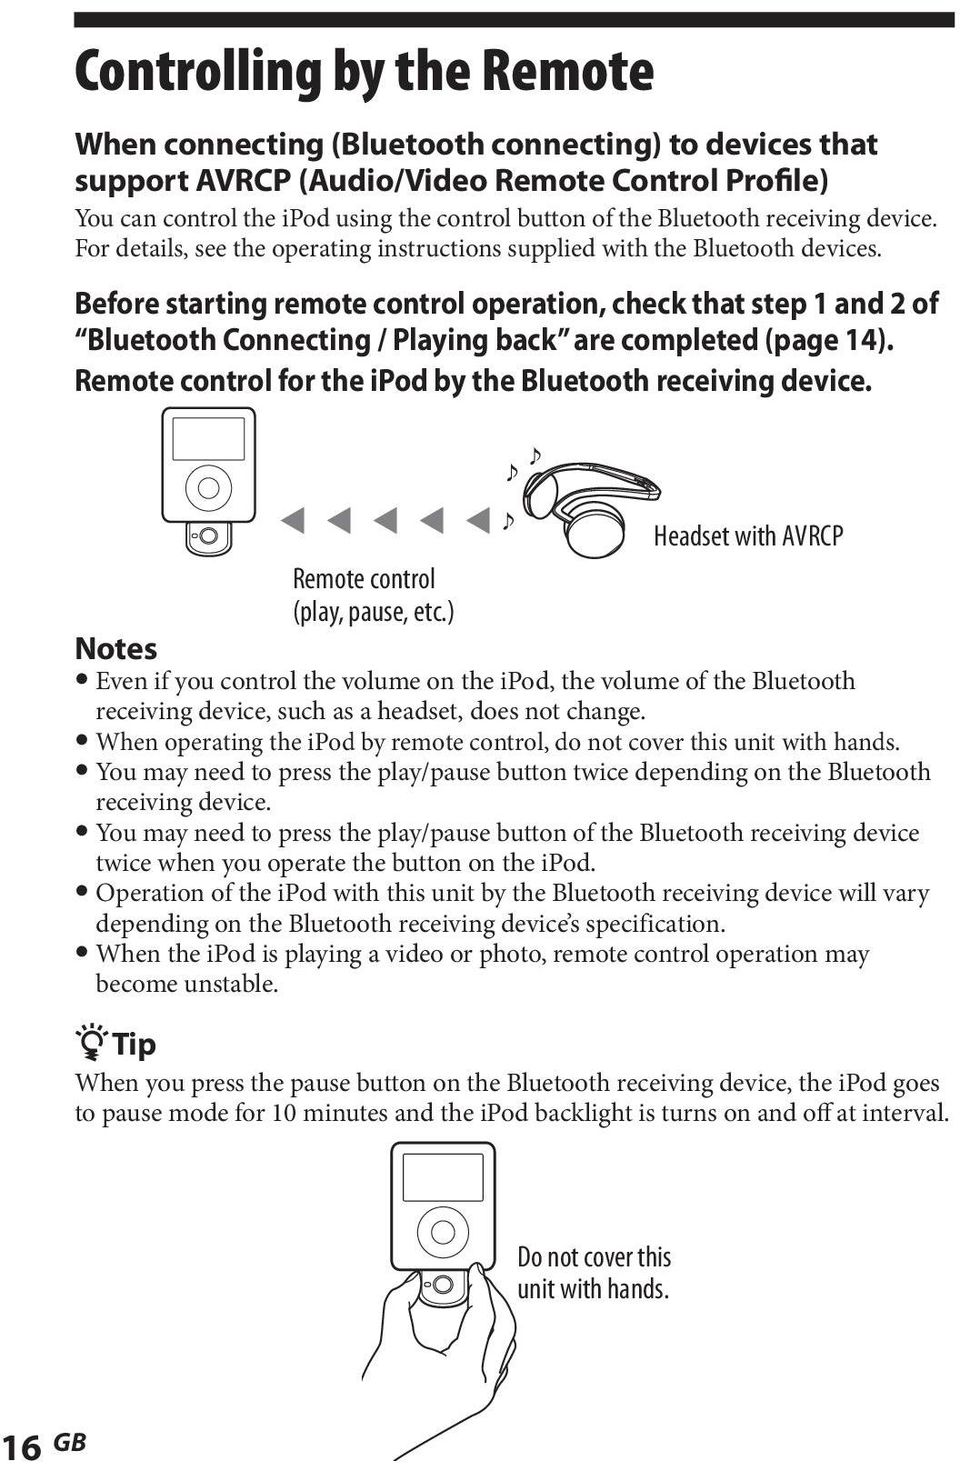 Before starting remote control operation, check that step 1 and 2 of Bluetooth Connecting / Playing back are completed (page 14). Remote control for the ipod by the Bluetooth receiving device.